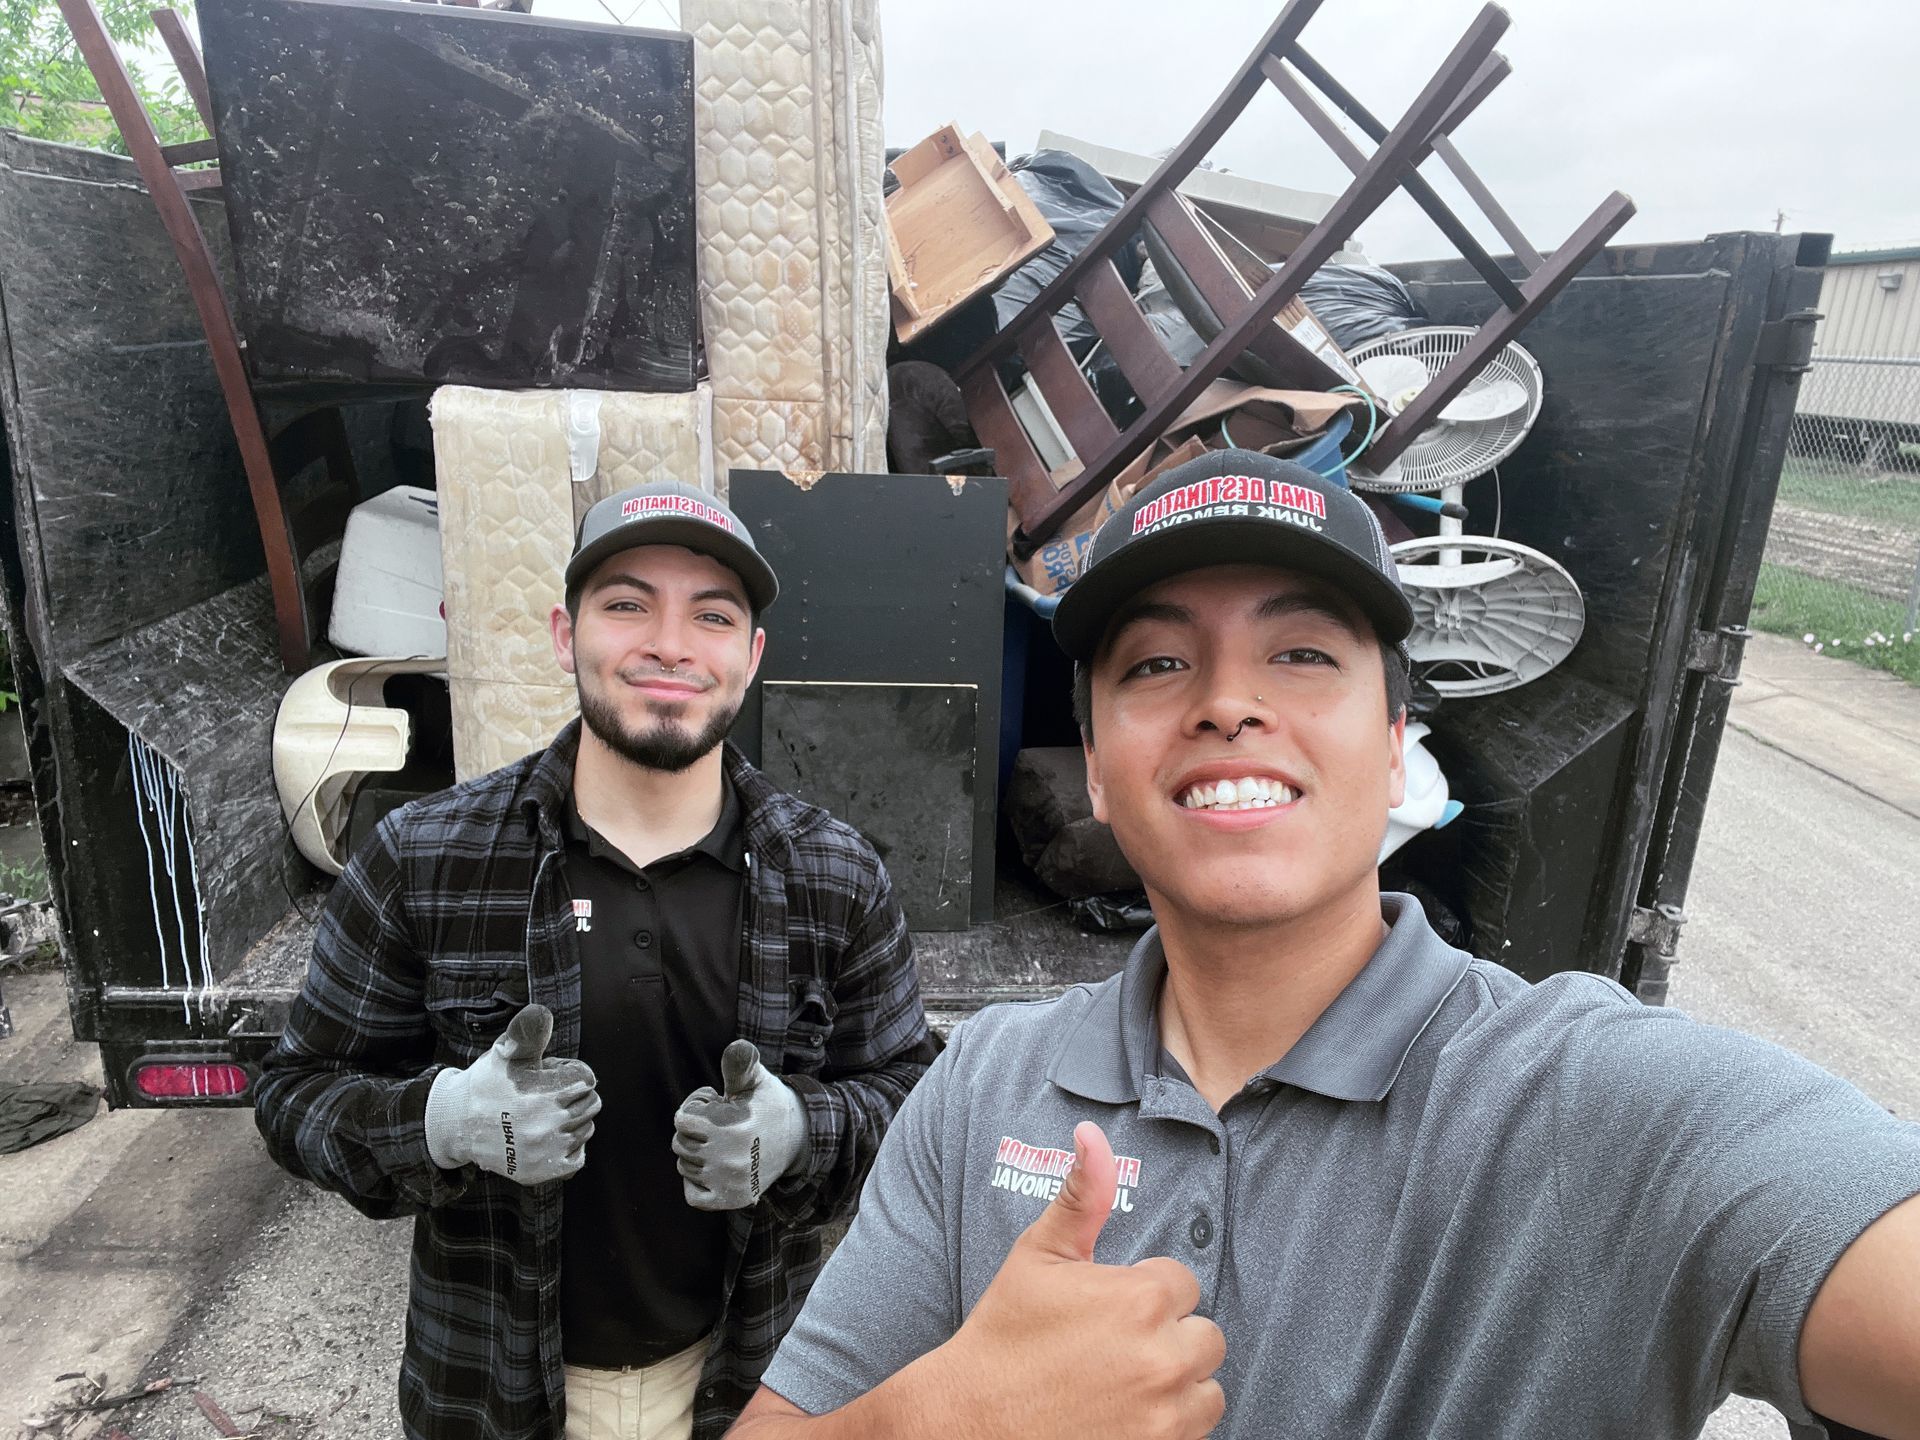 Looking to get rid of my junk in Cibolo, Texas? Reach out to your local junk hauling specialists - Final Destination. Our junk removal experts can remove your junk items with same-day service. What kind of junk do we remove in Cibolo Texas? We take appliances, furniture, remodeling debris, brush and more. Schedule a free junk pickup estimate in Cibolo today!